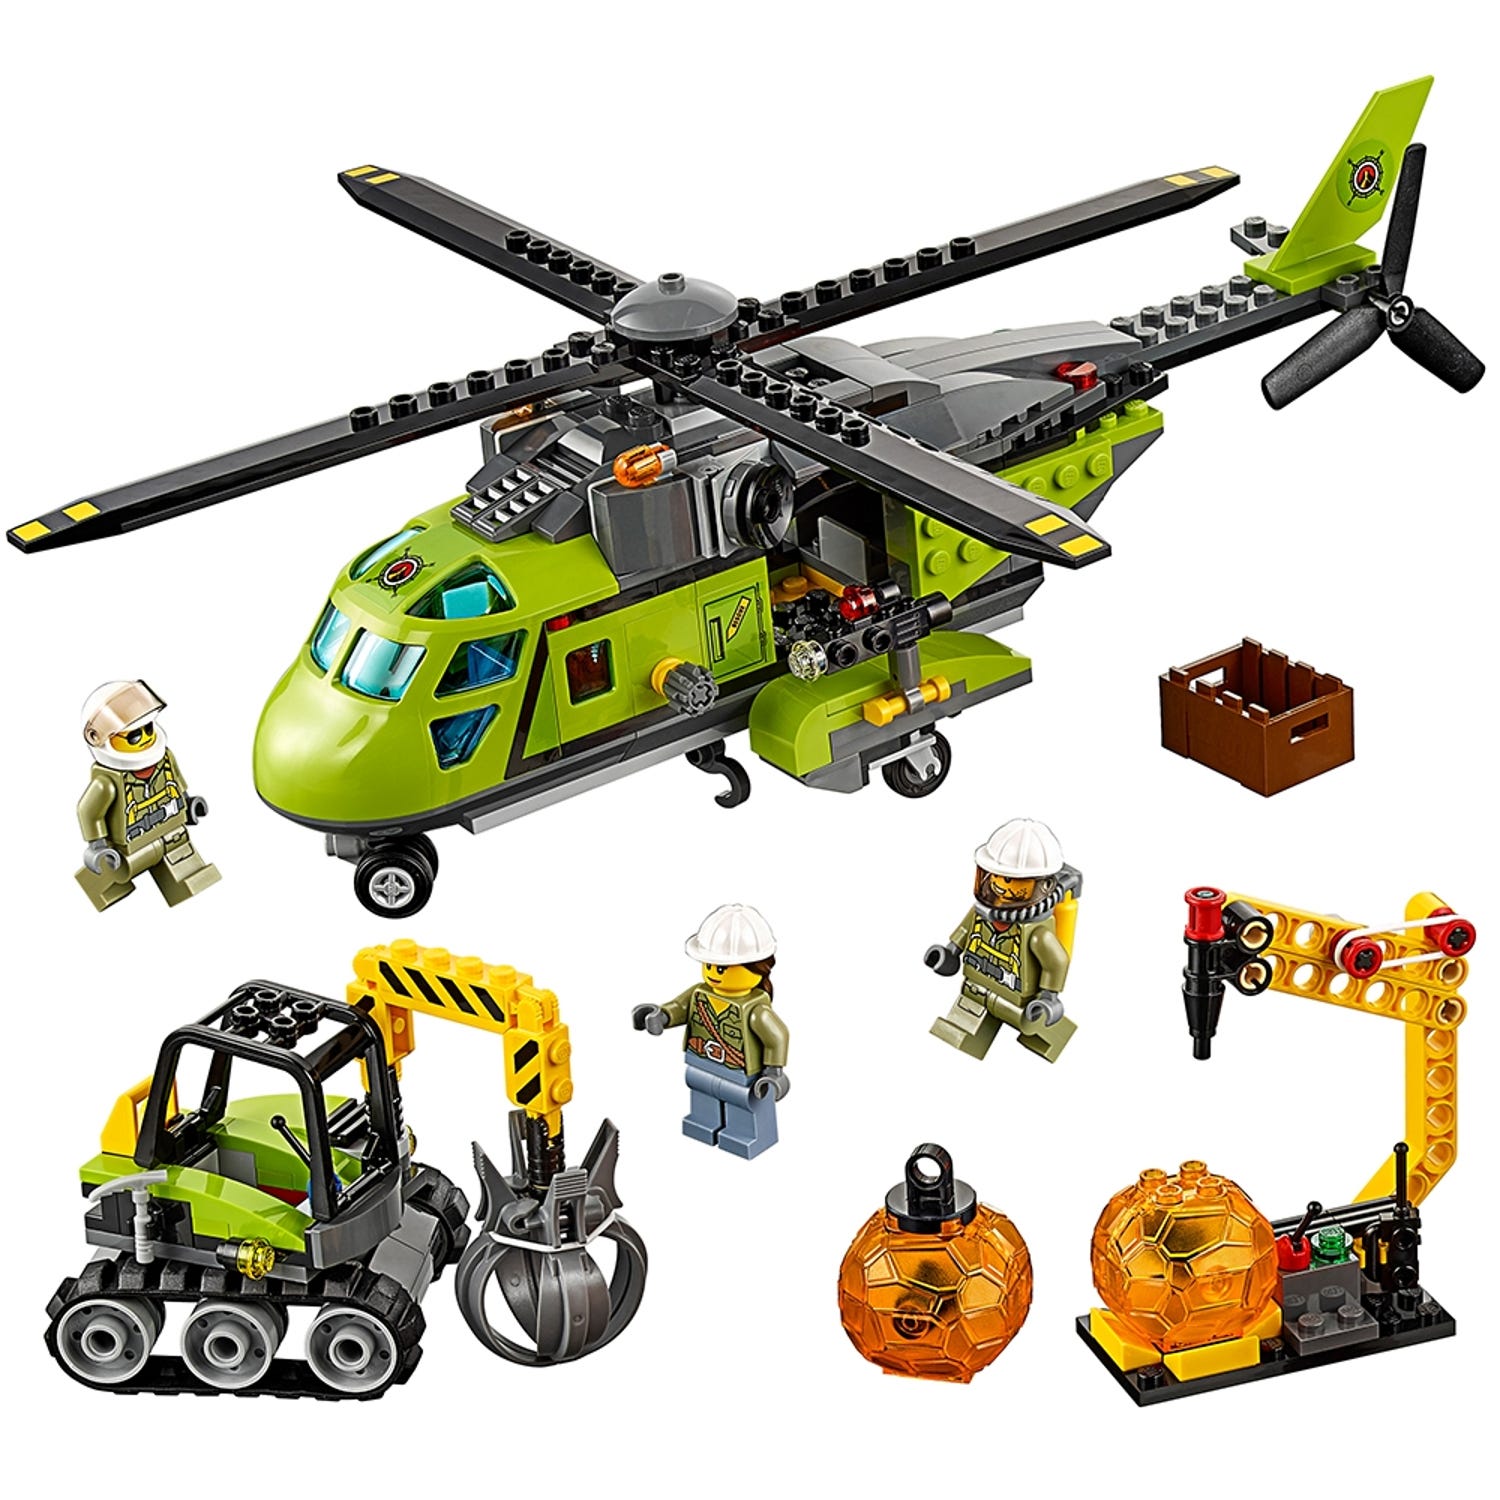 Volcano Helicopter | City | online the Official LEGO® Shop US